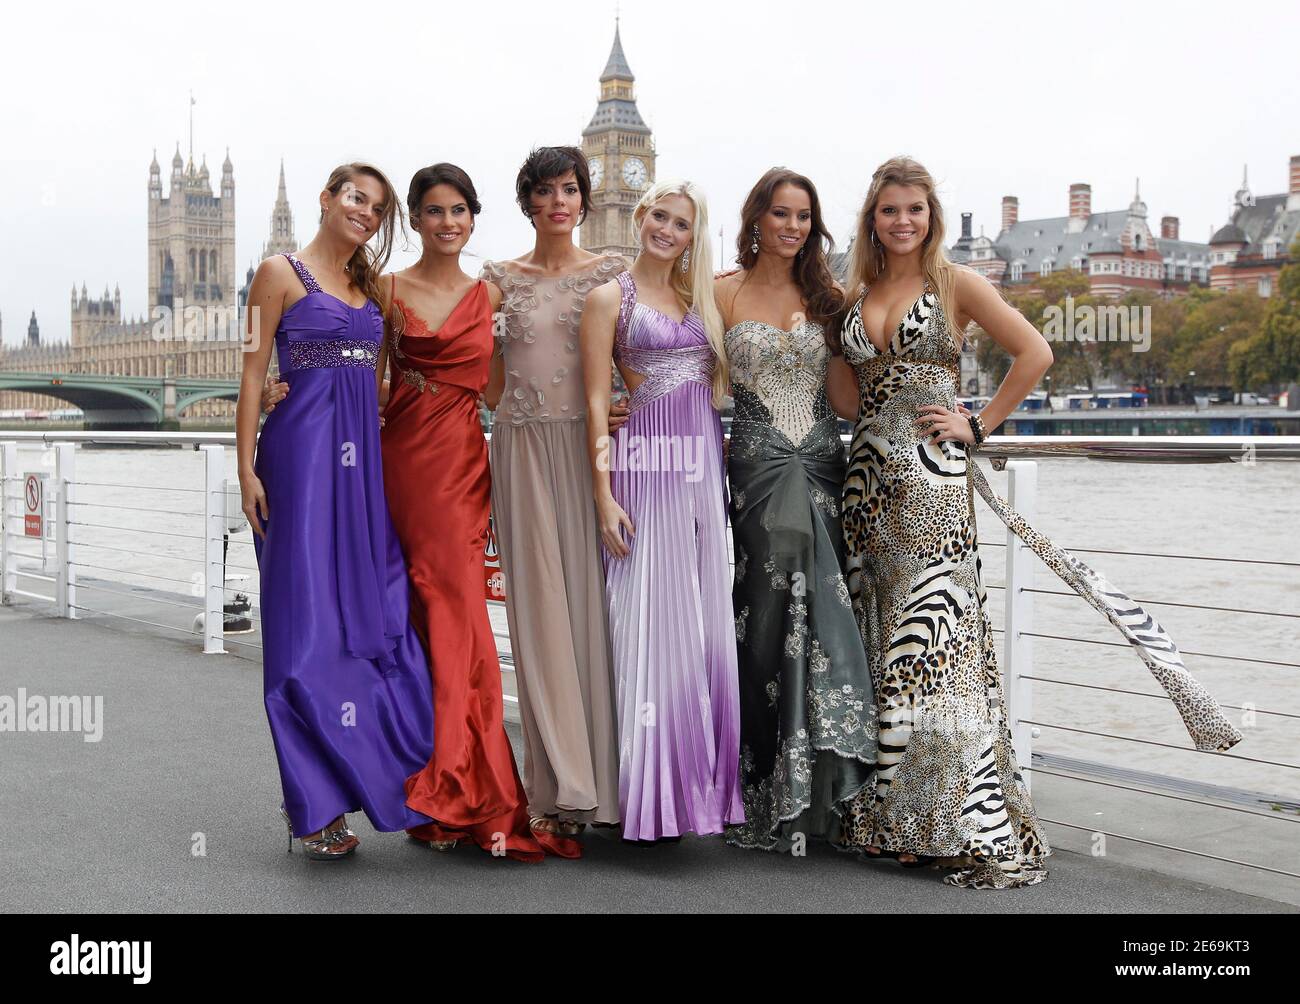 Miss World 2011 contestants (L-R) Miss France Clemence Oleksy, Miss Spain Carla Garcia Barber, Miss Italy Nunziata Bambaci, Miss Germany Sabrina Reitz, Miss Netherlands Jill Lauren De Robles, and Miss Belgium Justine De Jonckheere pose for photographers in front of the Houses of Parliament and the Big Ben clocktower in London October 31, 2011. The Miss World Finals will take place in London on November 6.  REUTERS/Suzanne Plunkett (BRITAIN - Tags: SOCIETY ENTERTAINMENT) Stock Photo